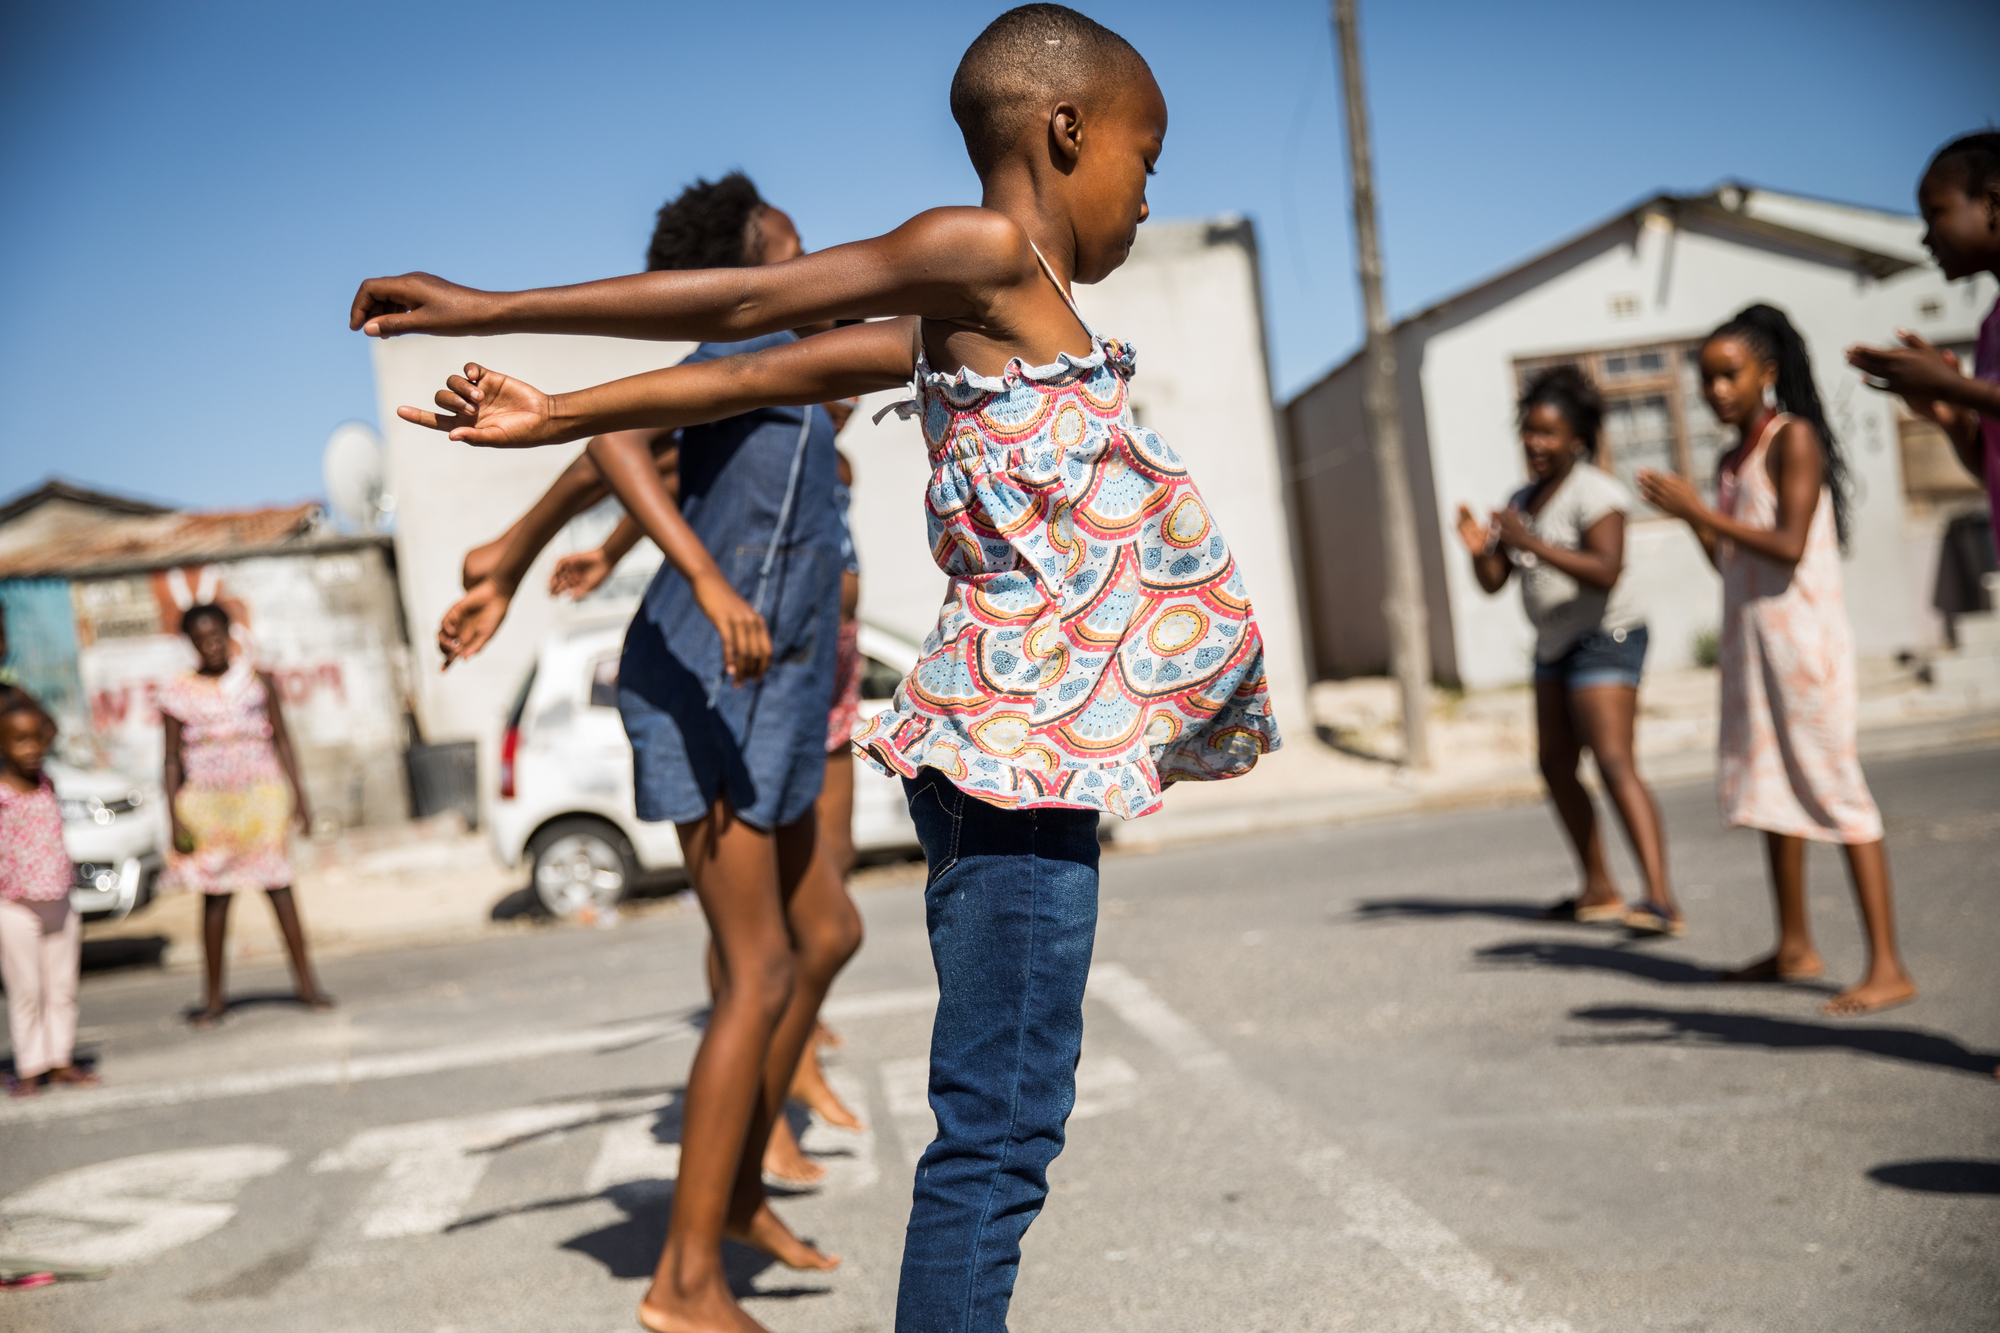 Children from neighboring streets converge to dance and play outside in Cape Town, South Africa